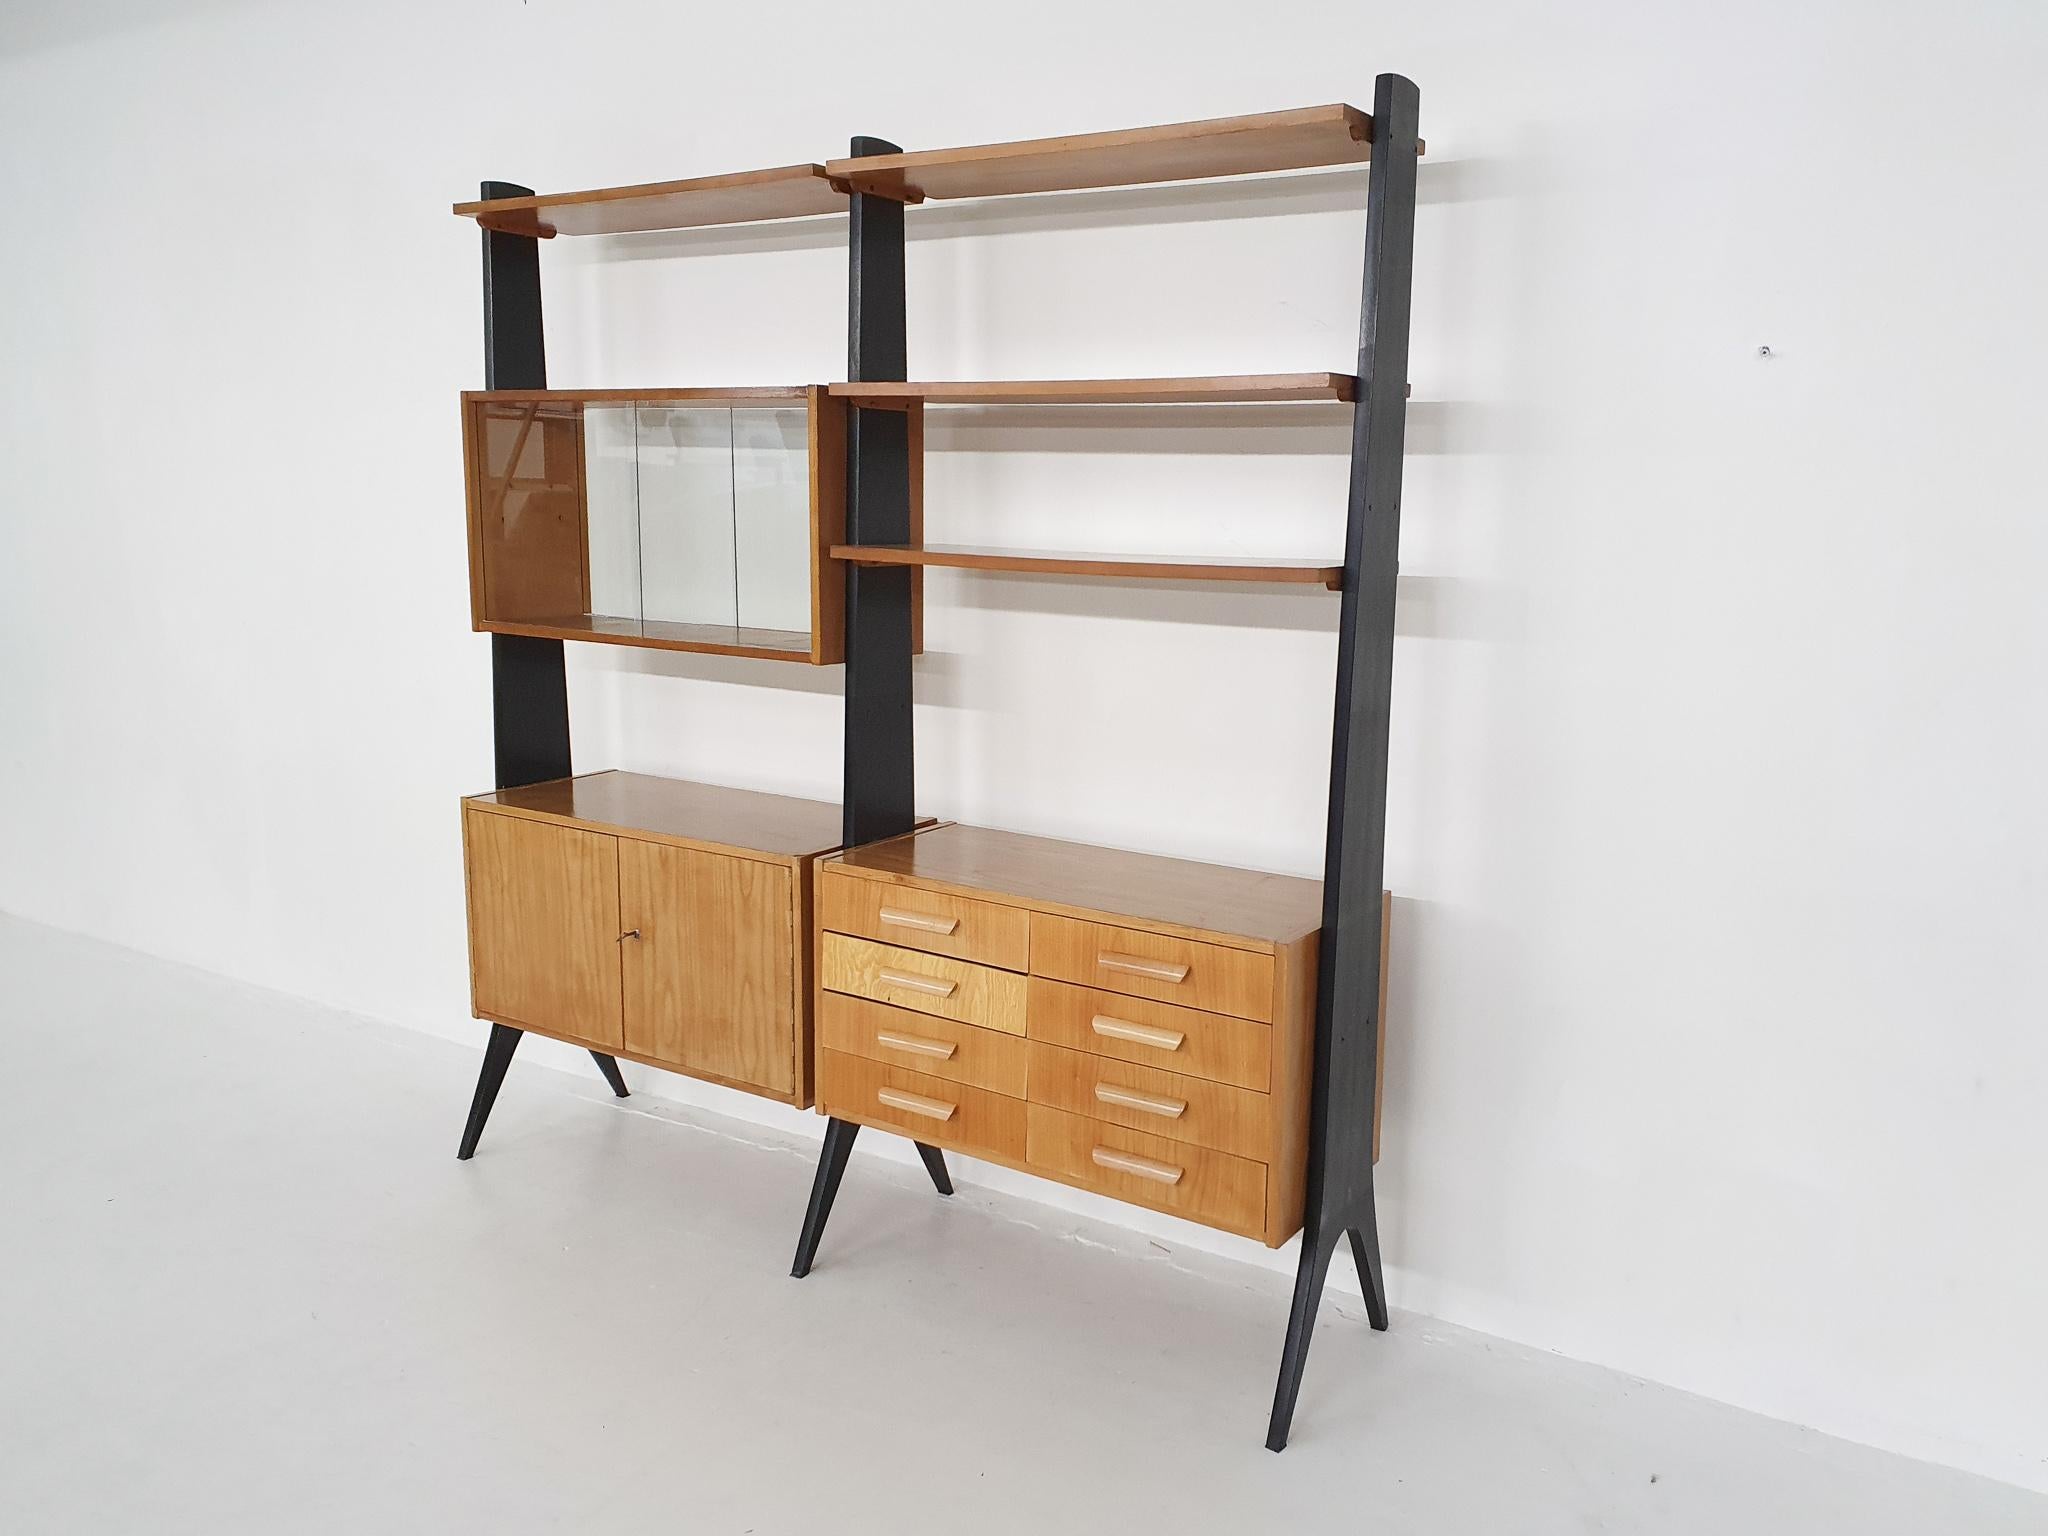 Free standing wall unit in birch veneer with black wooden risers.
the handles of the drawers are not original and one drawer is not original.

2x cabinet: 90 x 40 x 47 cm (LxWxH)
Cabinet with glass sliding doors: 90 x 30 x 47 cm (LxWxH)
4x